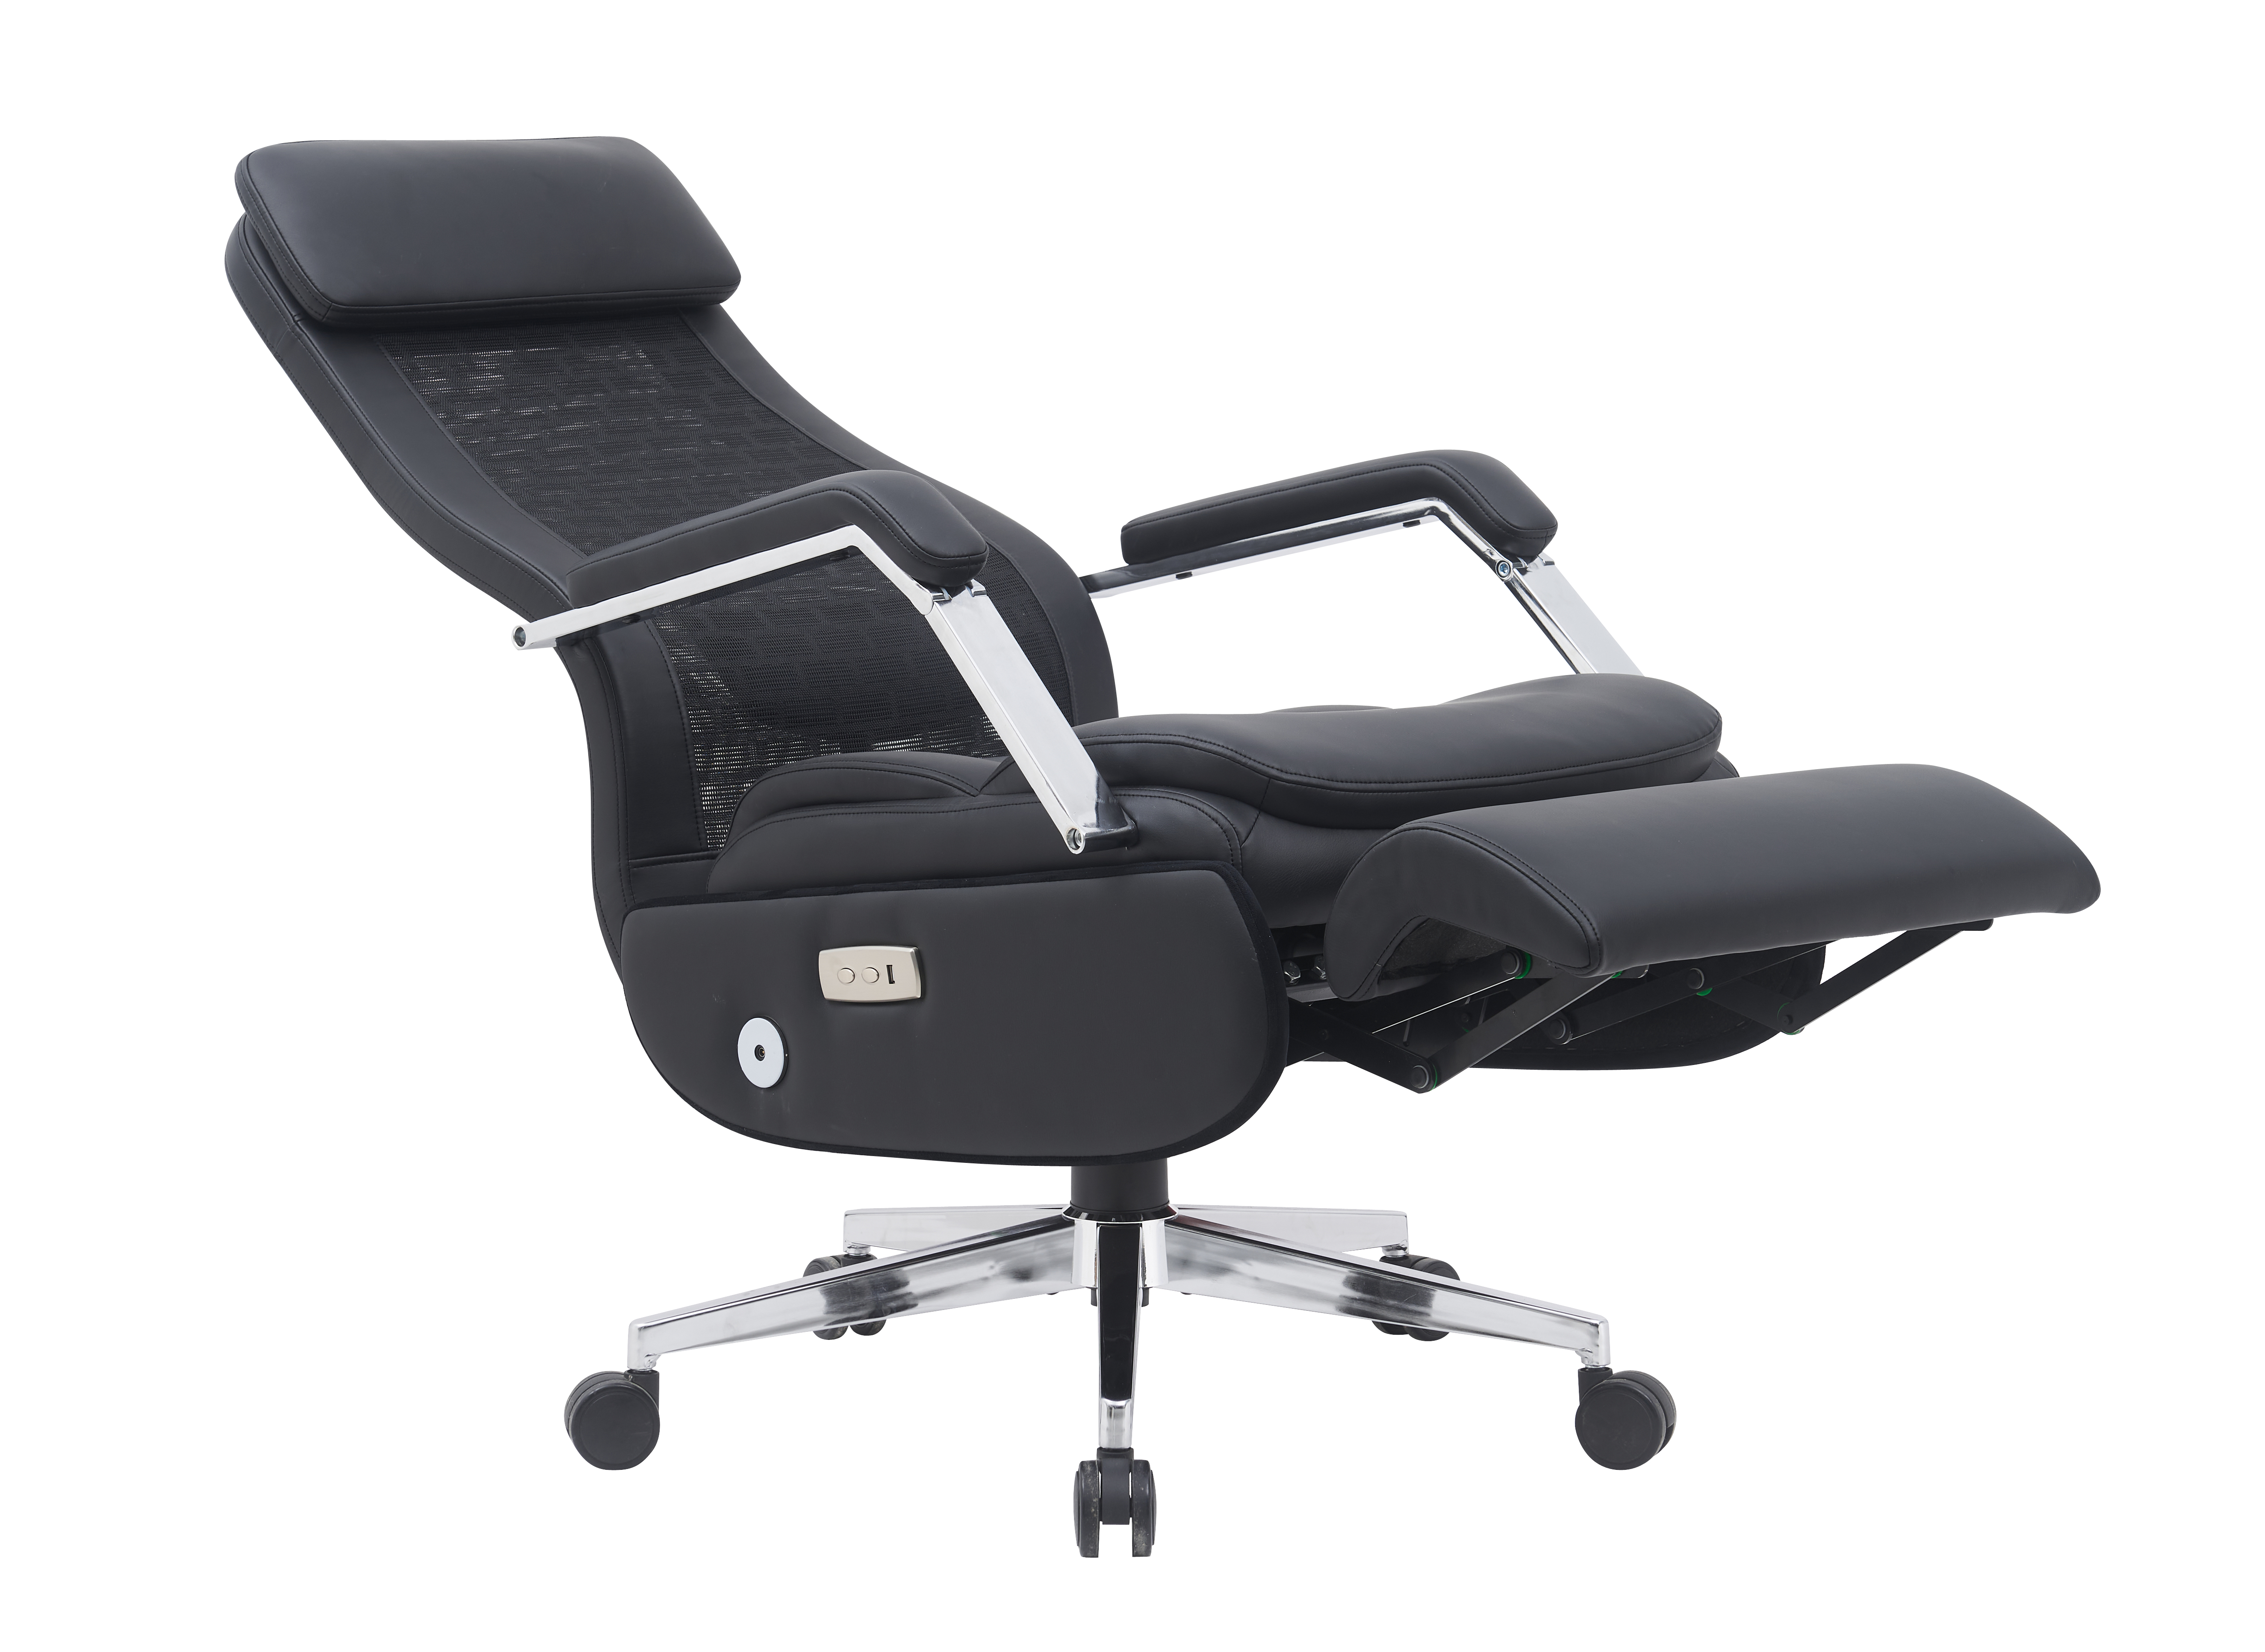 SHINERUN Electric Adjustable Recliner Chair with Footrest